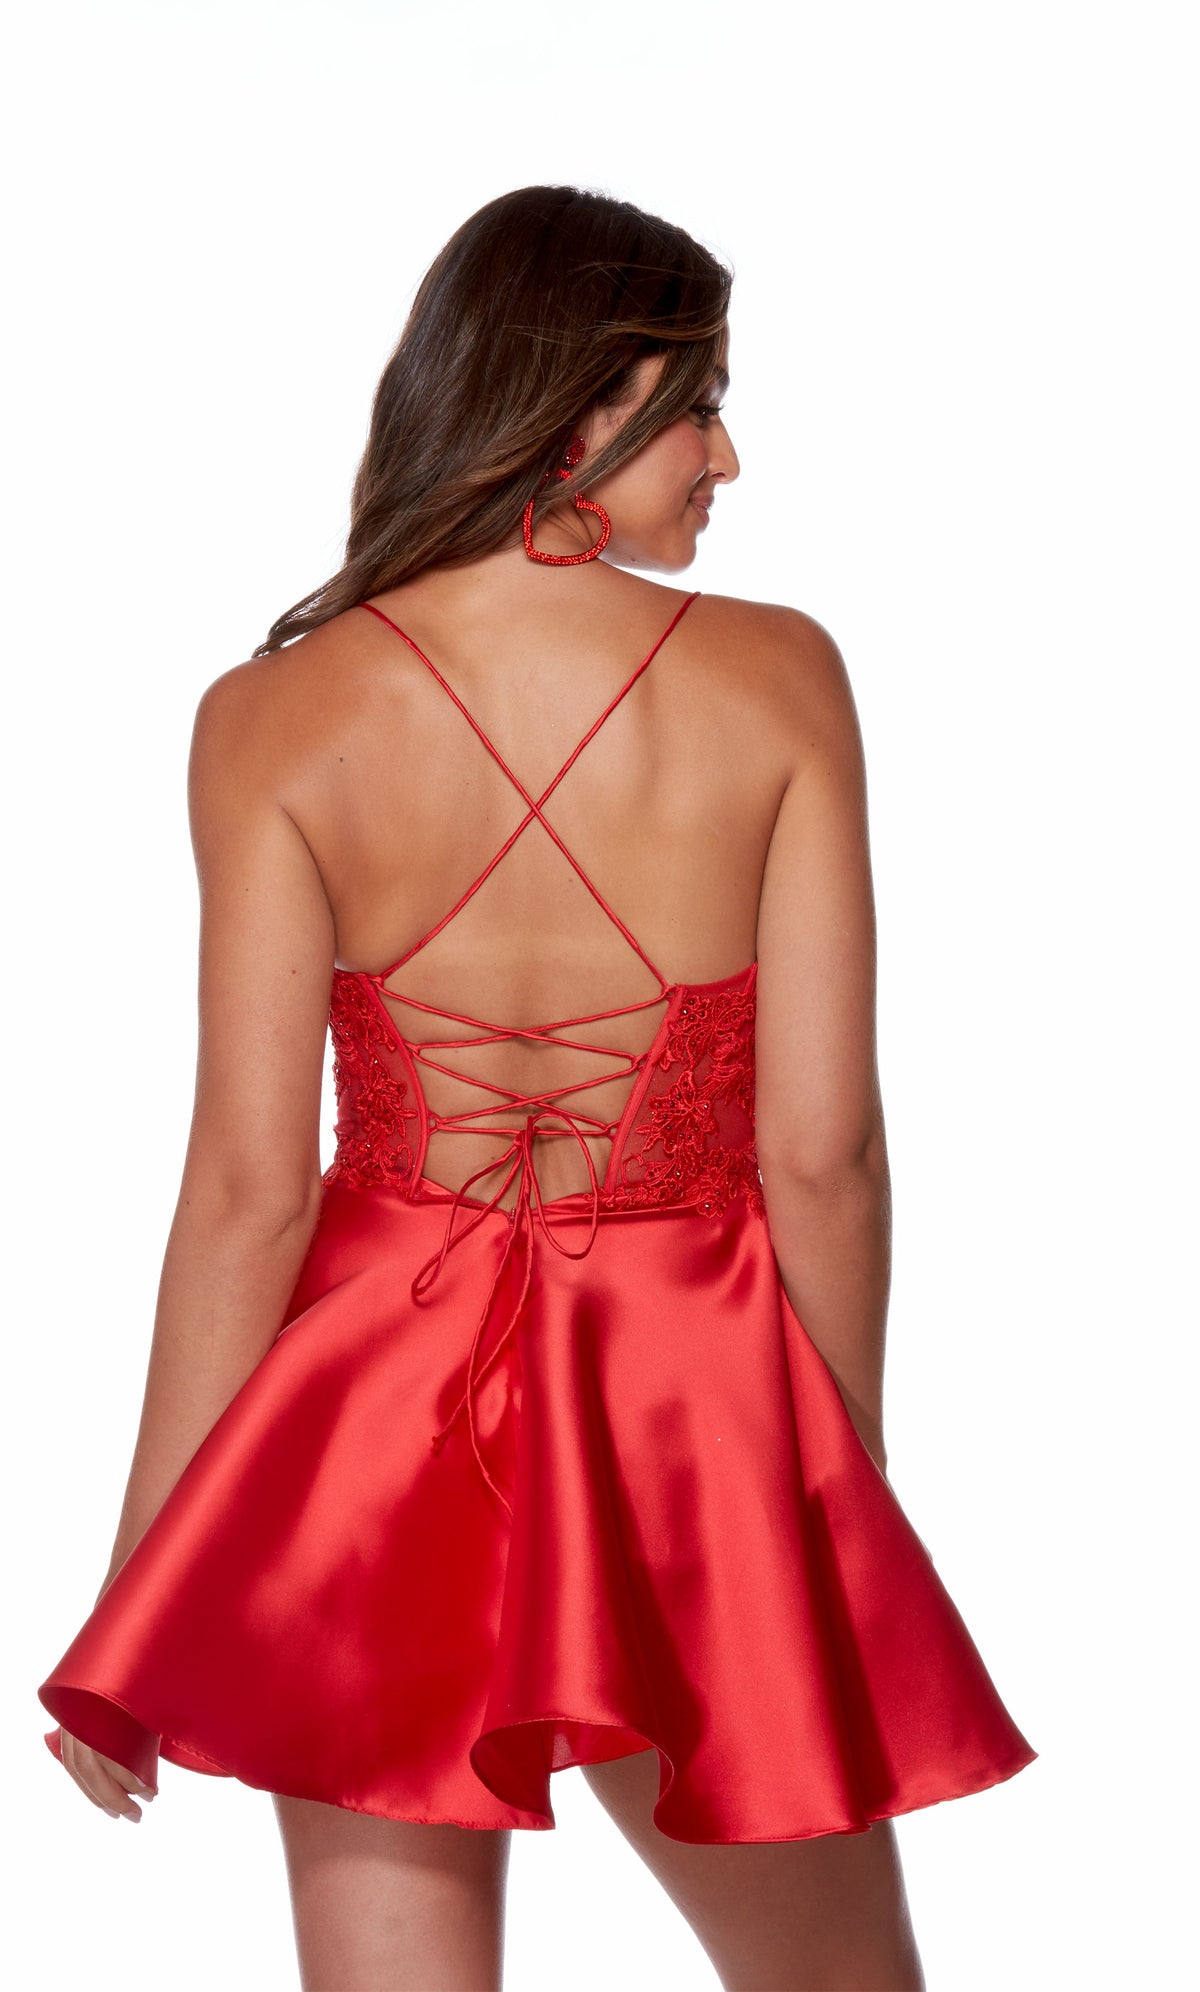 A short red party dress, featuring a plunging neckline, sheer corset top, and a strappy open back, by designer Alyce Paris.